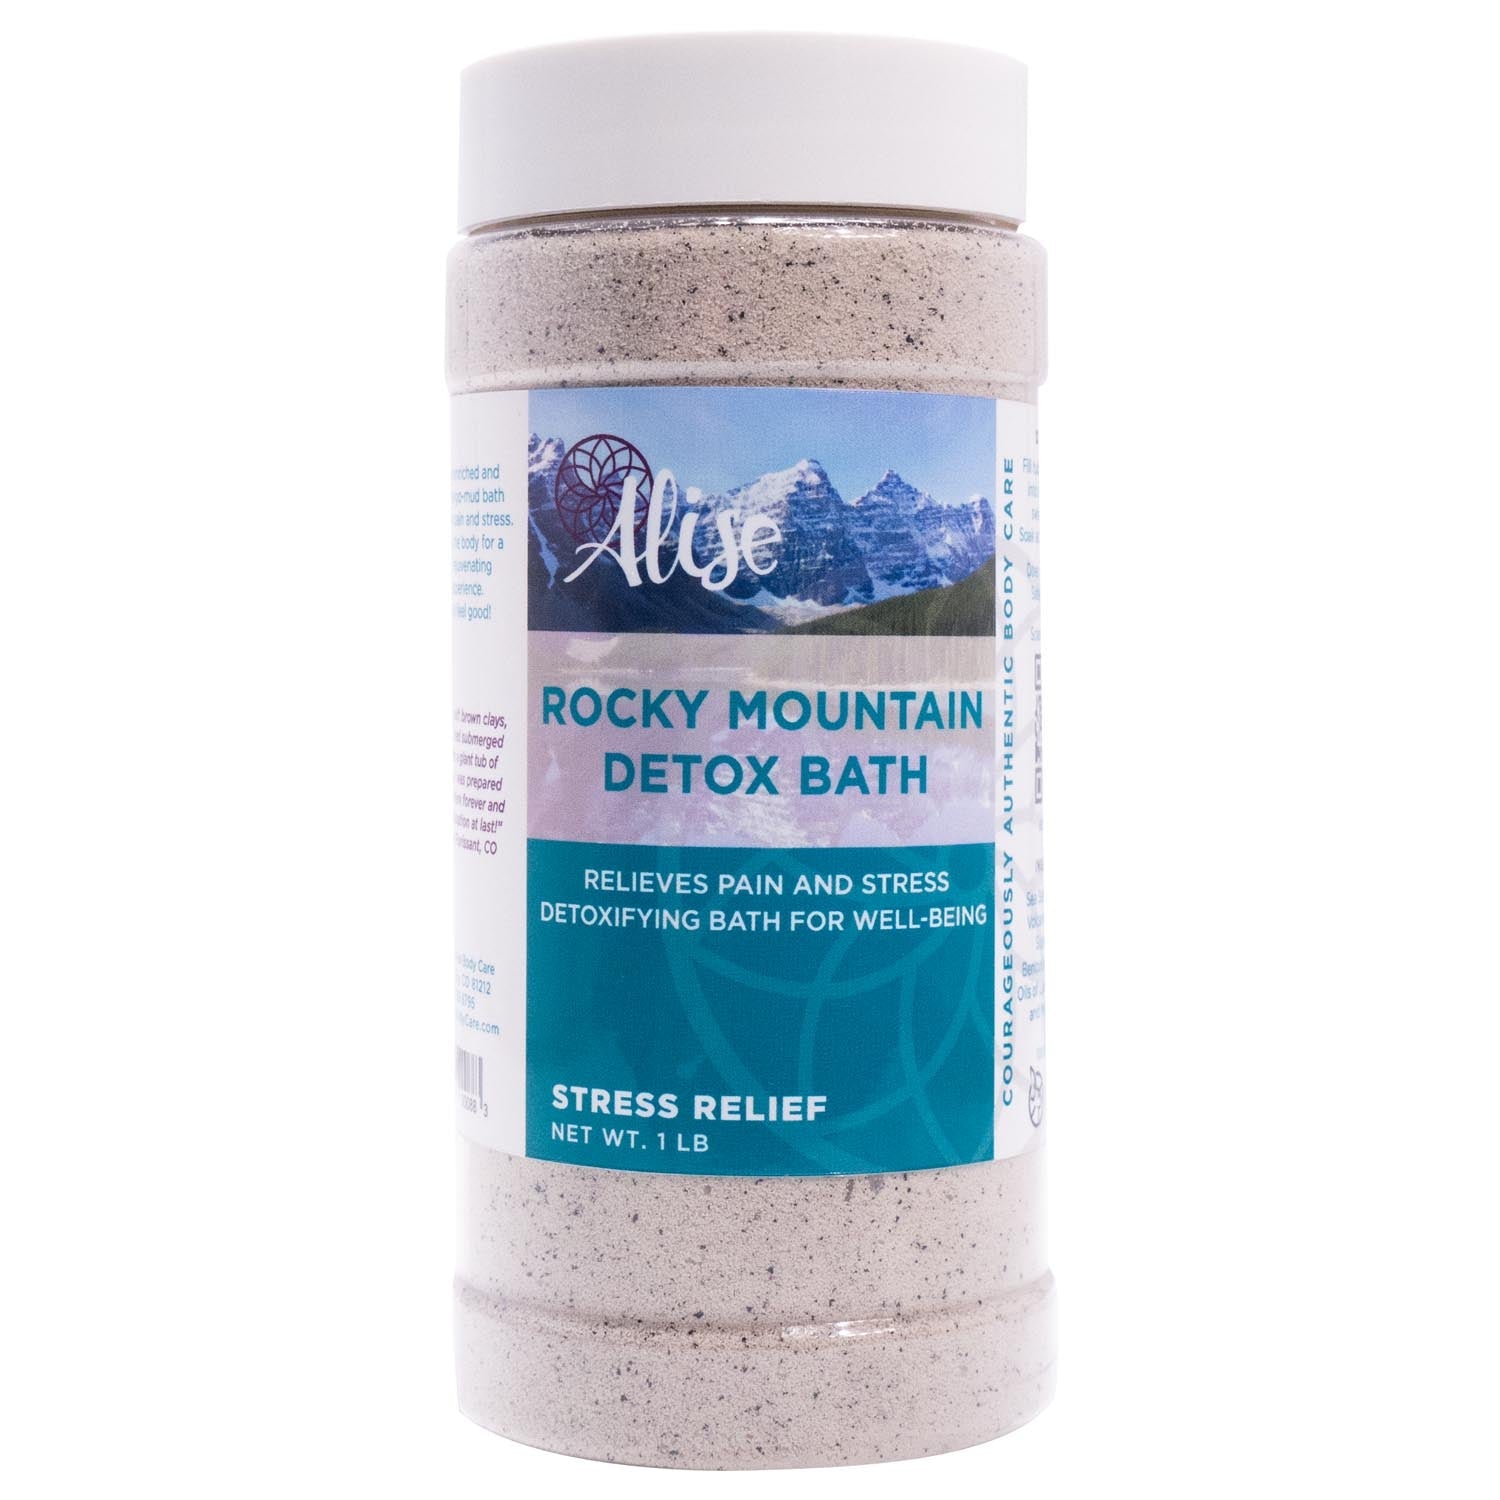 Rocky Mountain Detox Bath Stress Relief Blend 1lb handcrafted by Alise Body Care